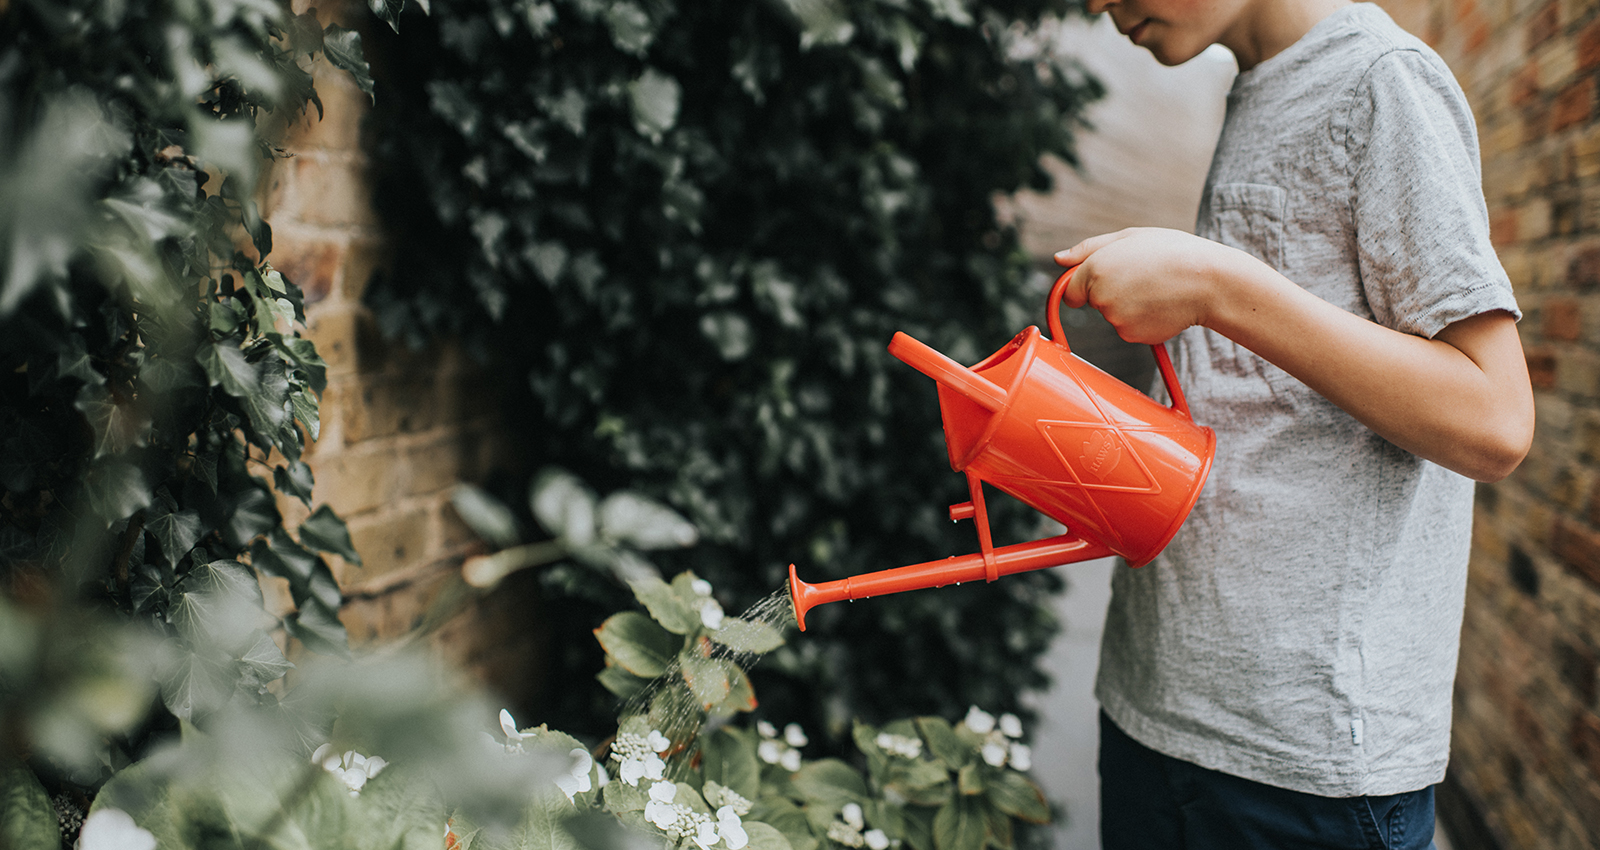 Choosing the Best Watering Can: Plastic Watering Can & Stainless Steel Watering Can Buying Guide